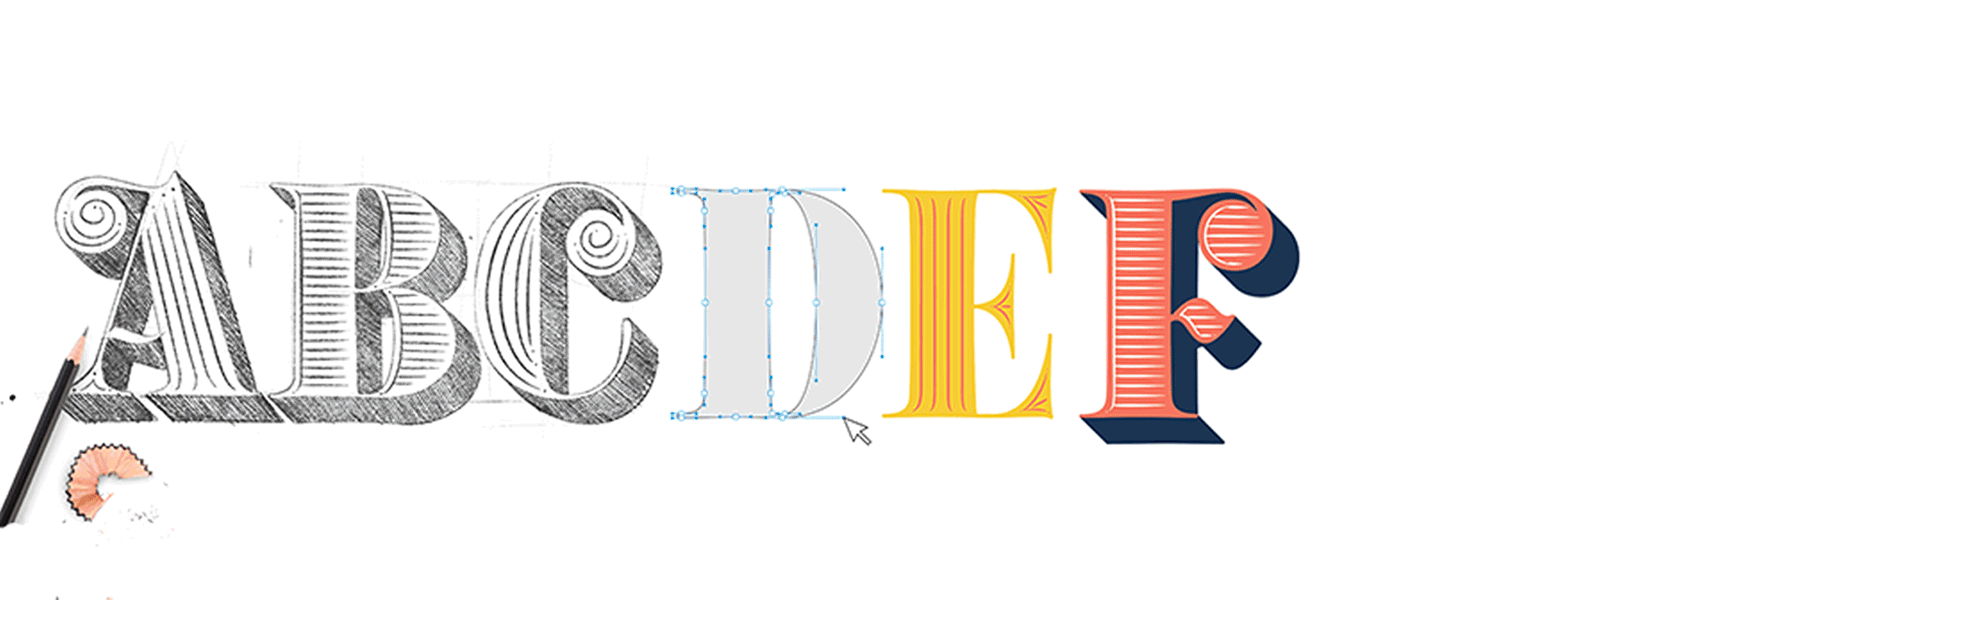 This image is an animation showing ABCDEFONT in various letters animated